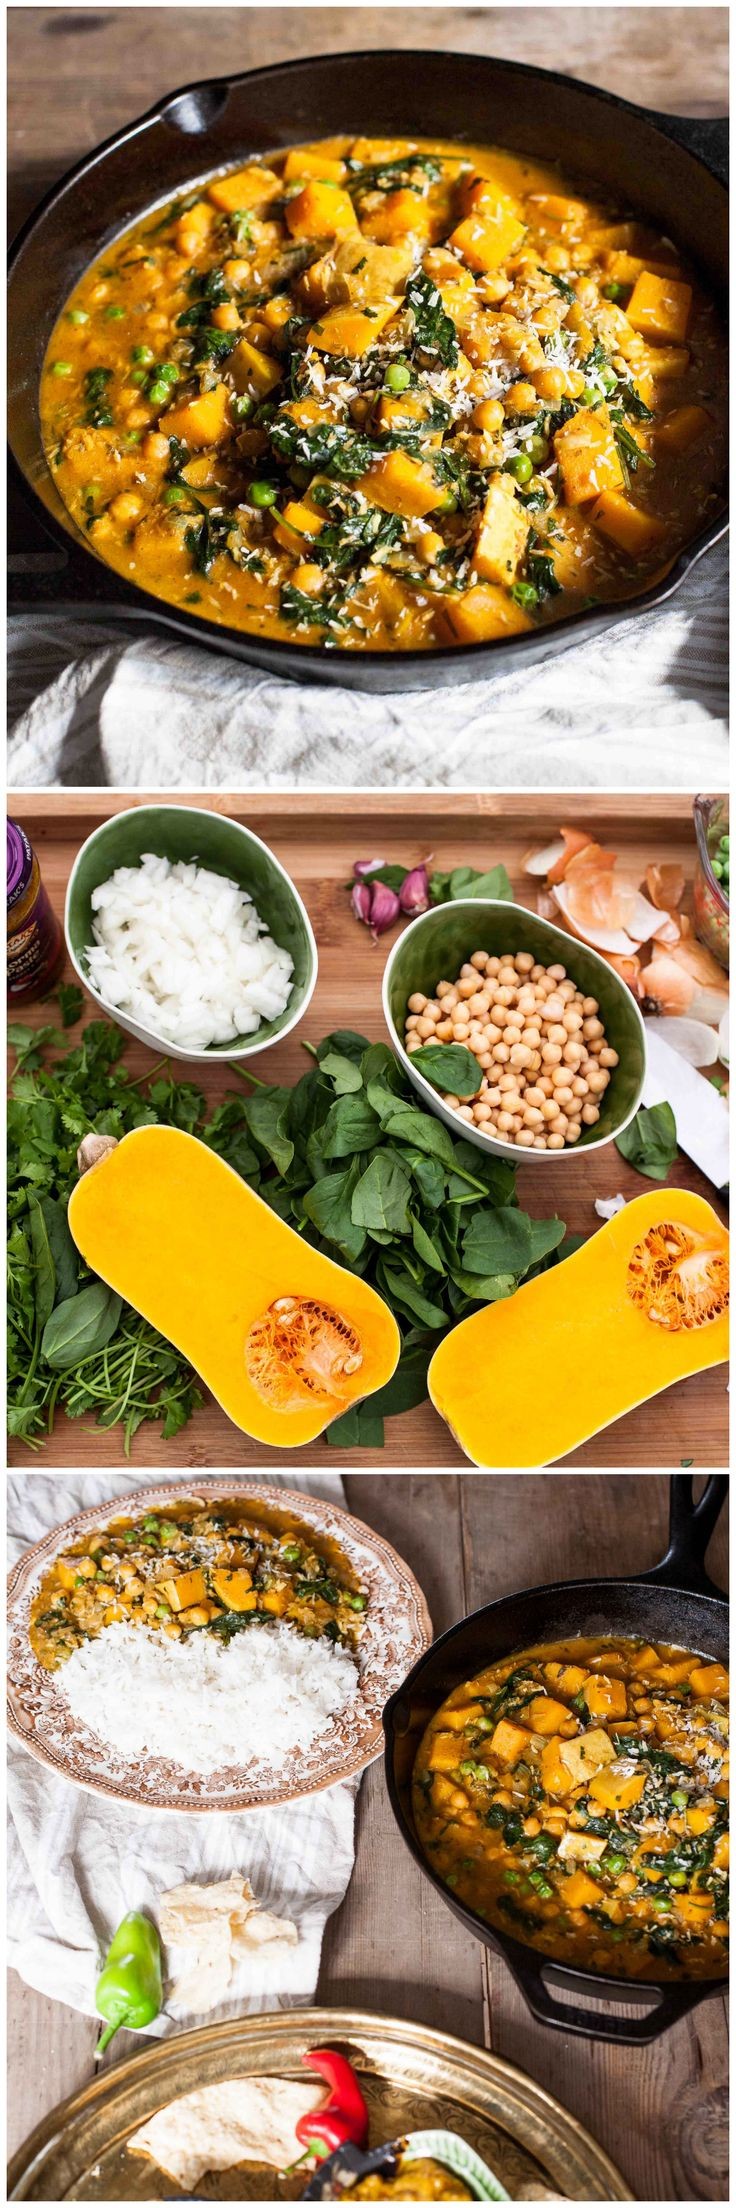 Chickpea and Butternut Squash Curry -this vegetari...